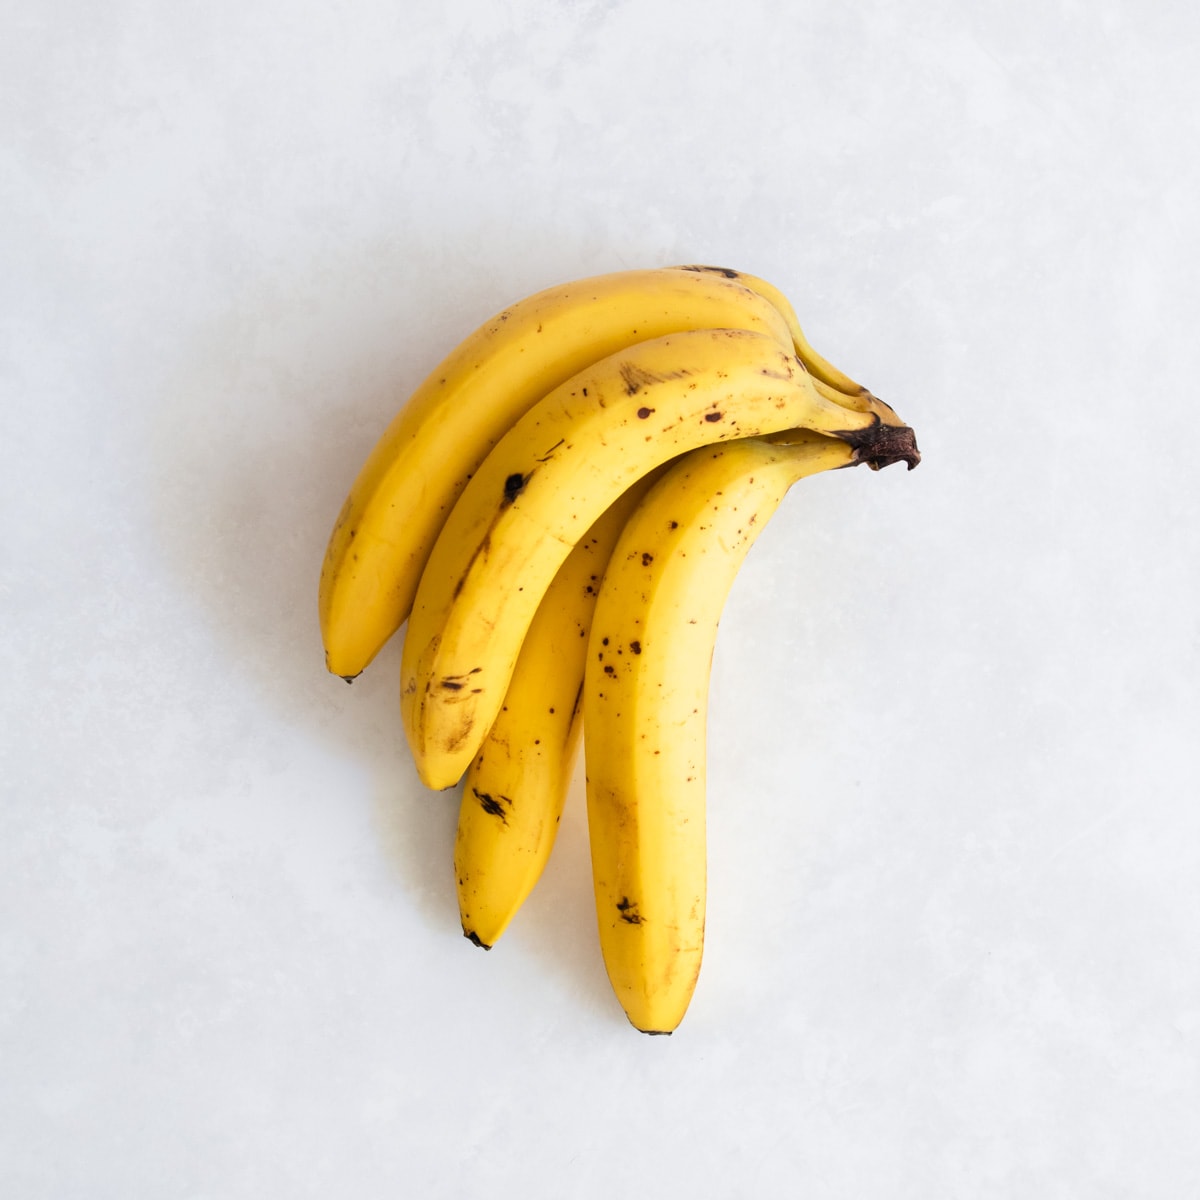 Four ripe bananas on a grey background.